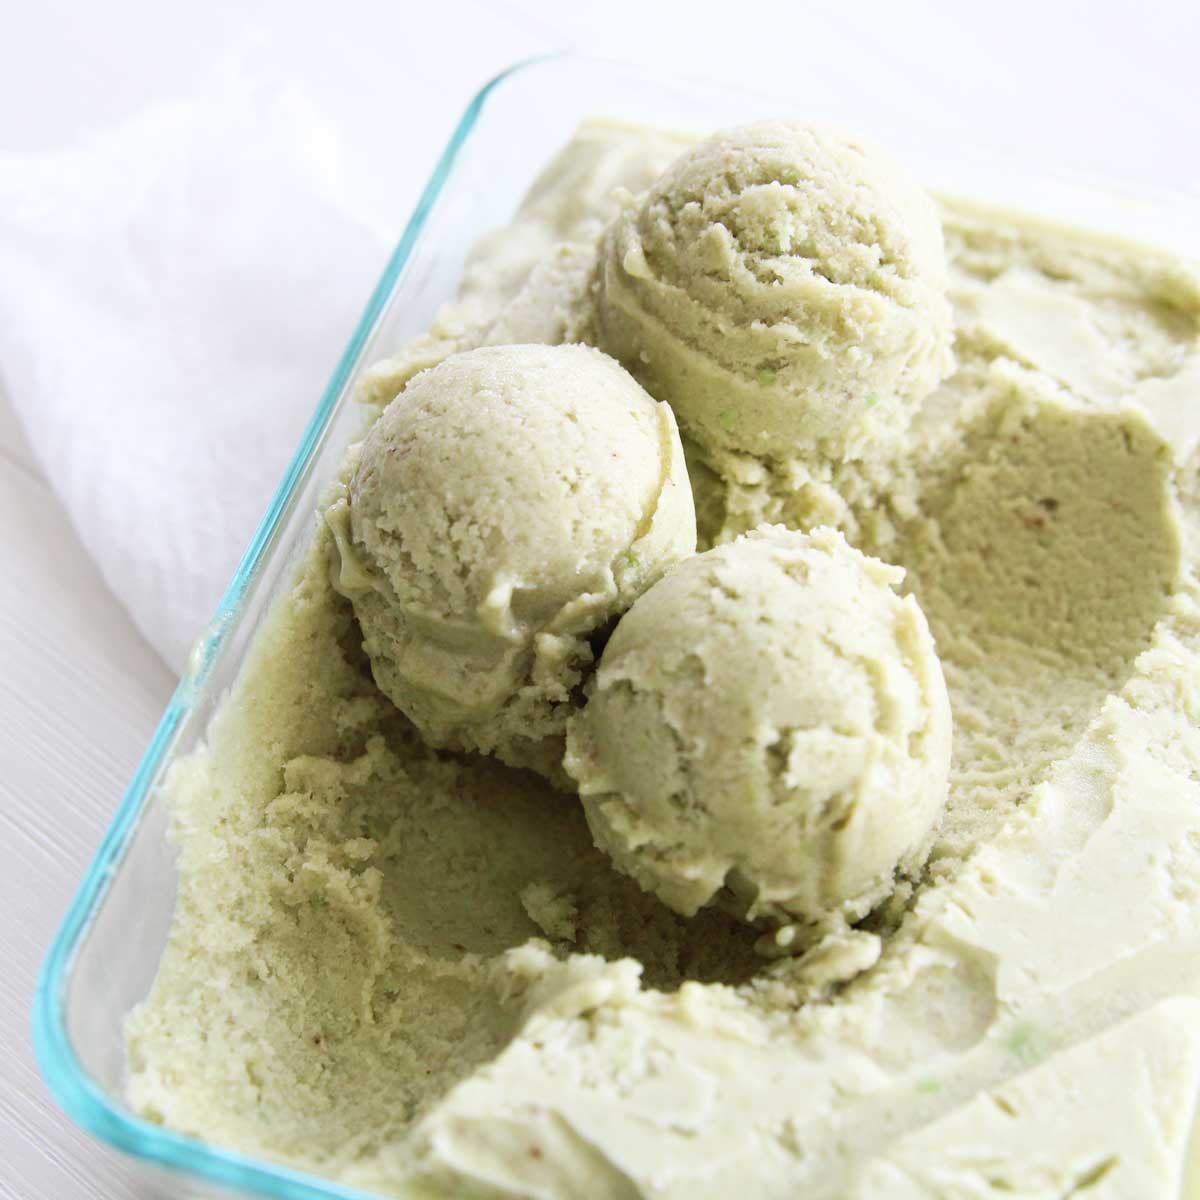 Healthy Pecan Butter Ice Cream (Made in the Food Processor) - Pecan Butter Ice Cream